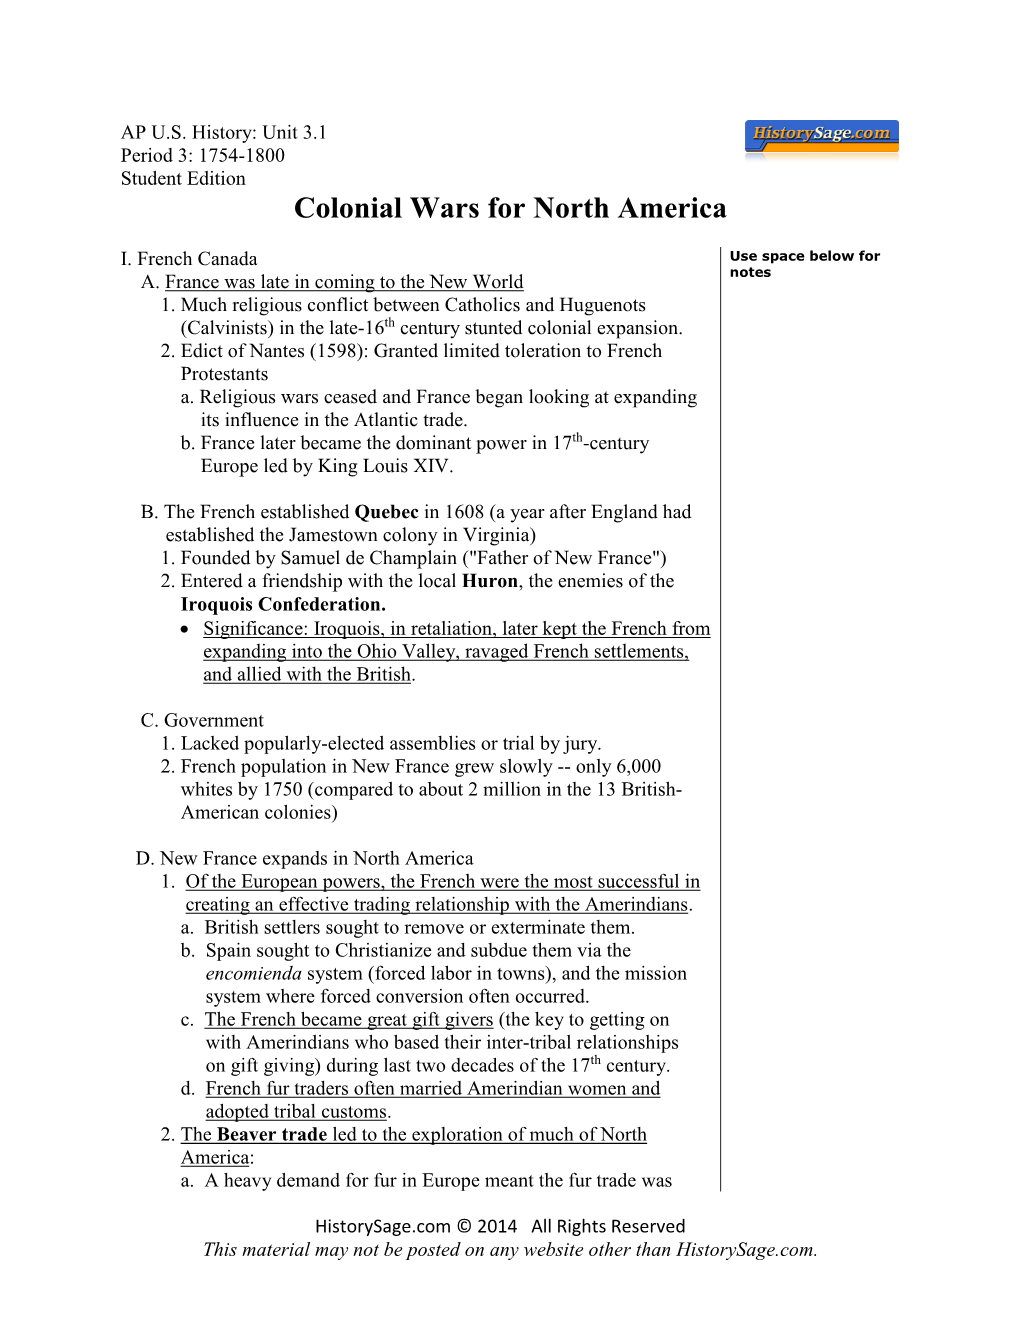 Colonial Wars for North America Packet APUSH